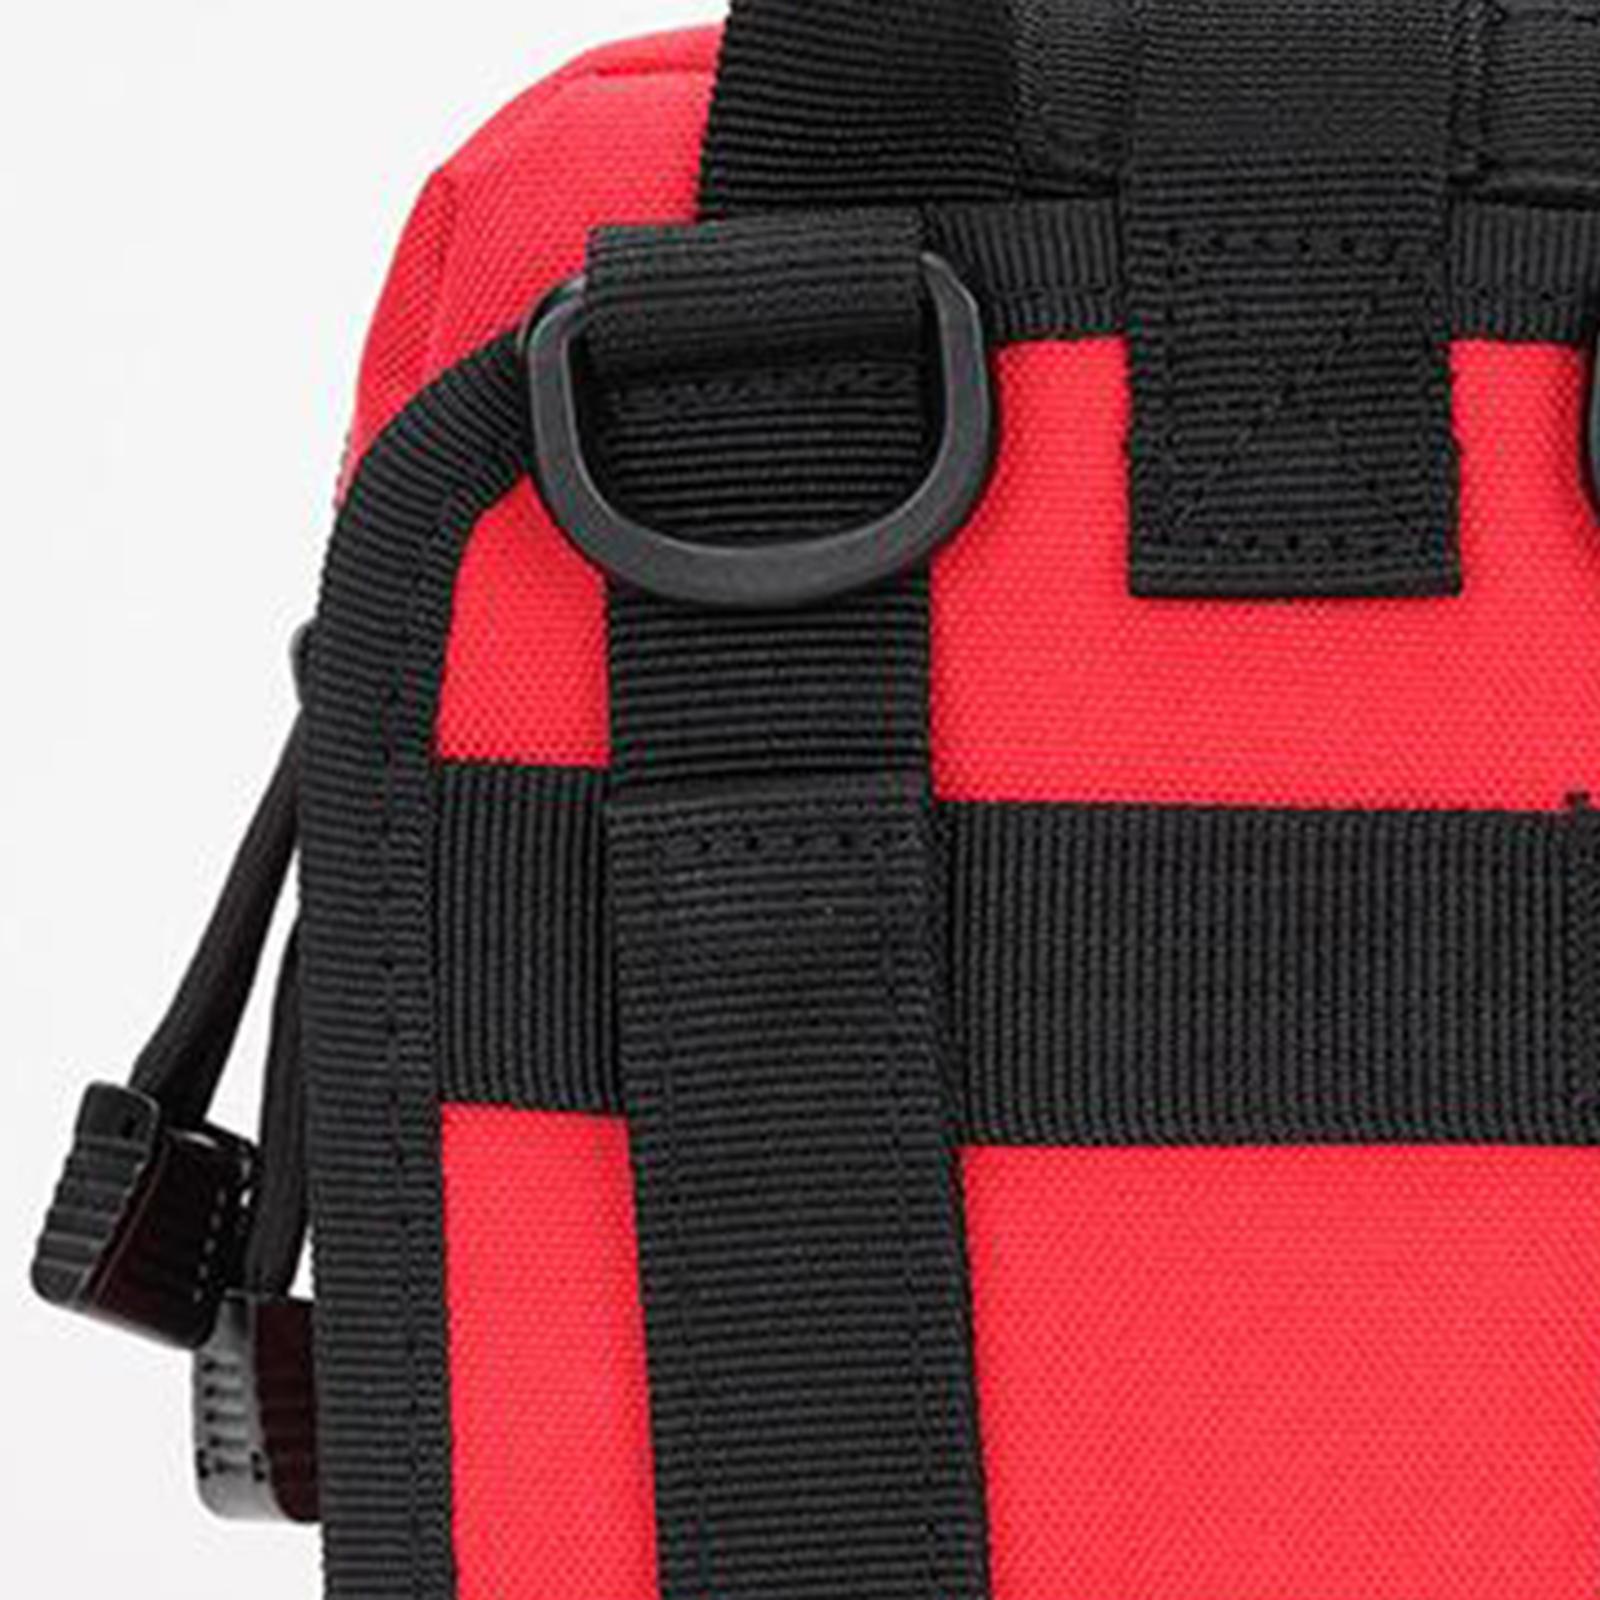 Tactical Bag First Aid Kit Outdoor Emergency Survival Pouch Red